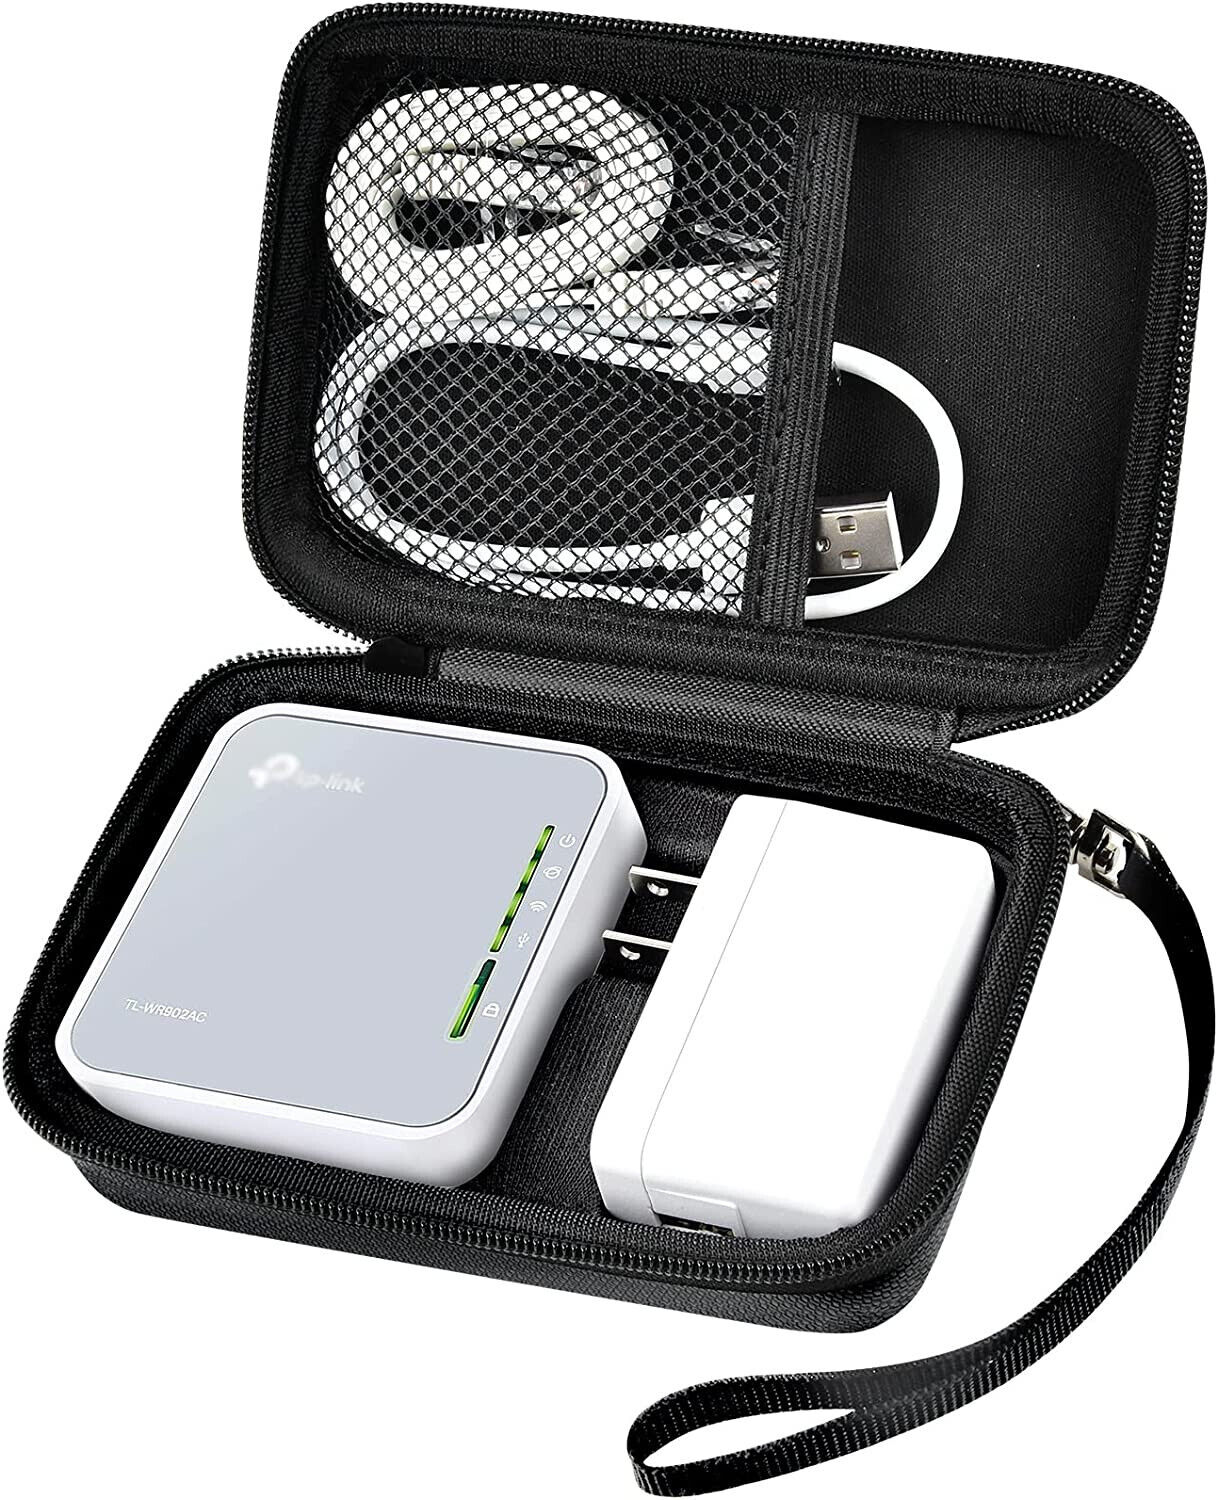 Case for TP-Link AC750 Wireless Portable Nano Travel Router Hotspot / CASE ONLY